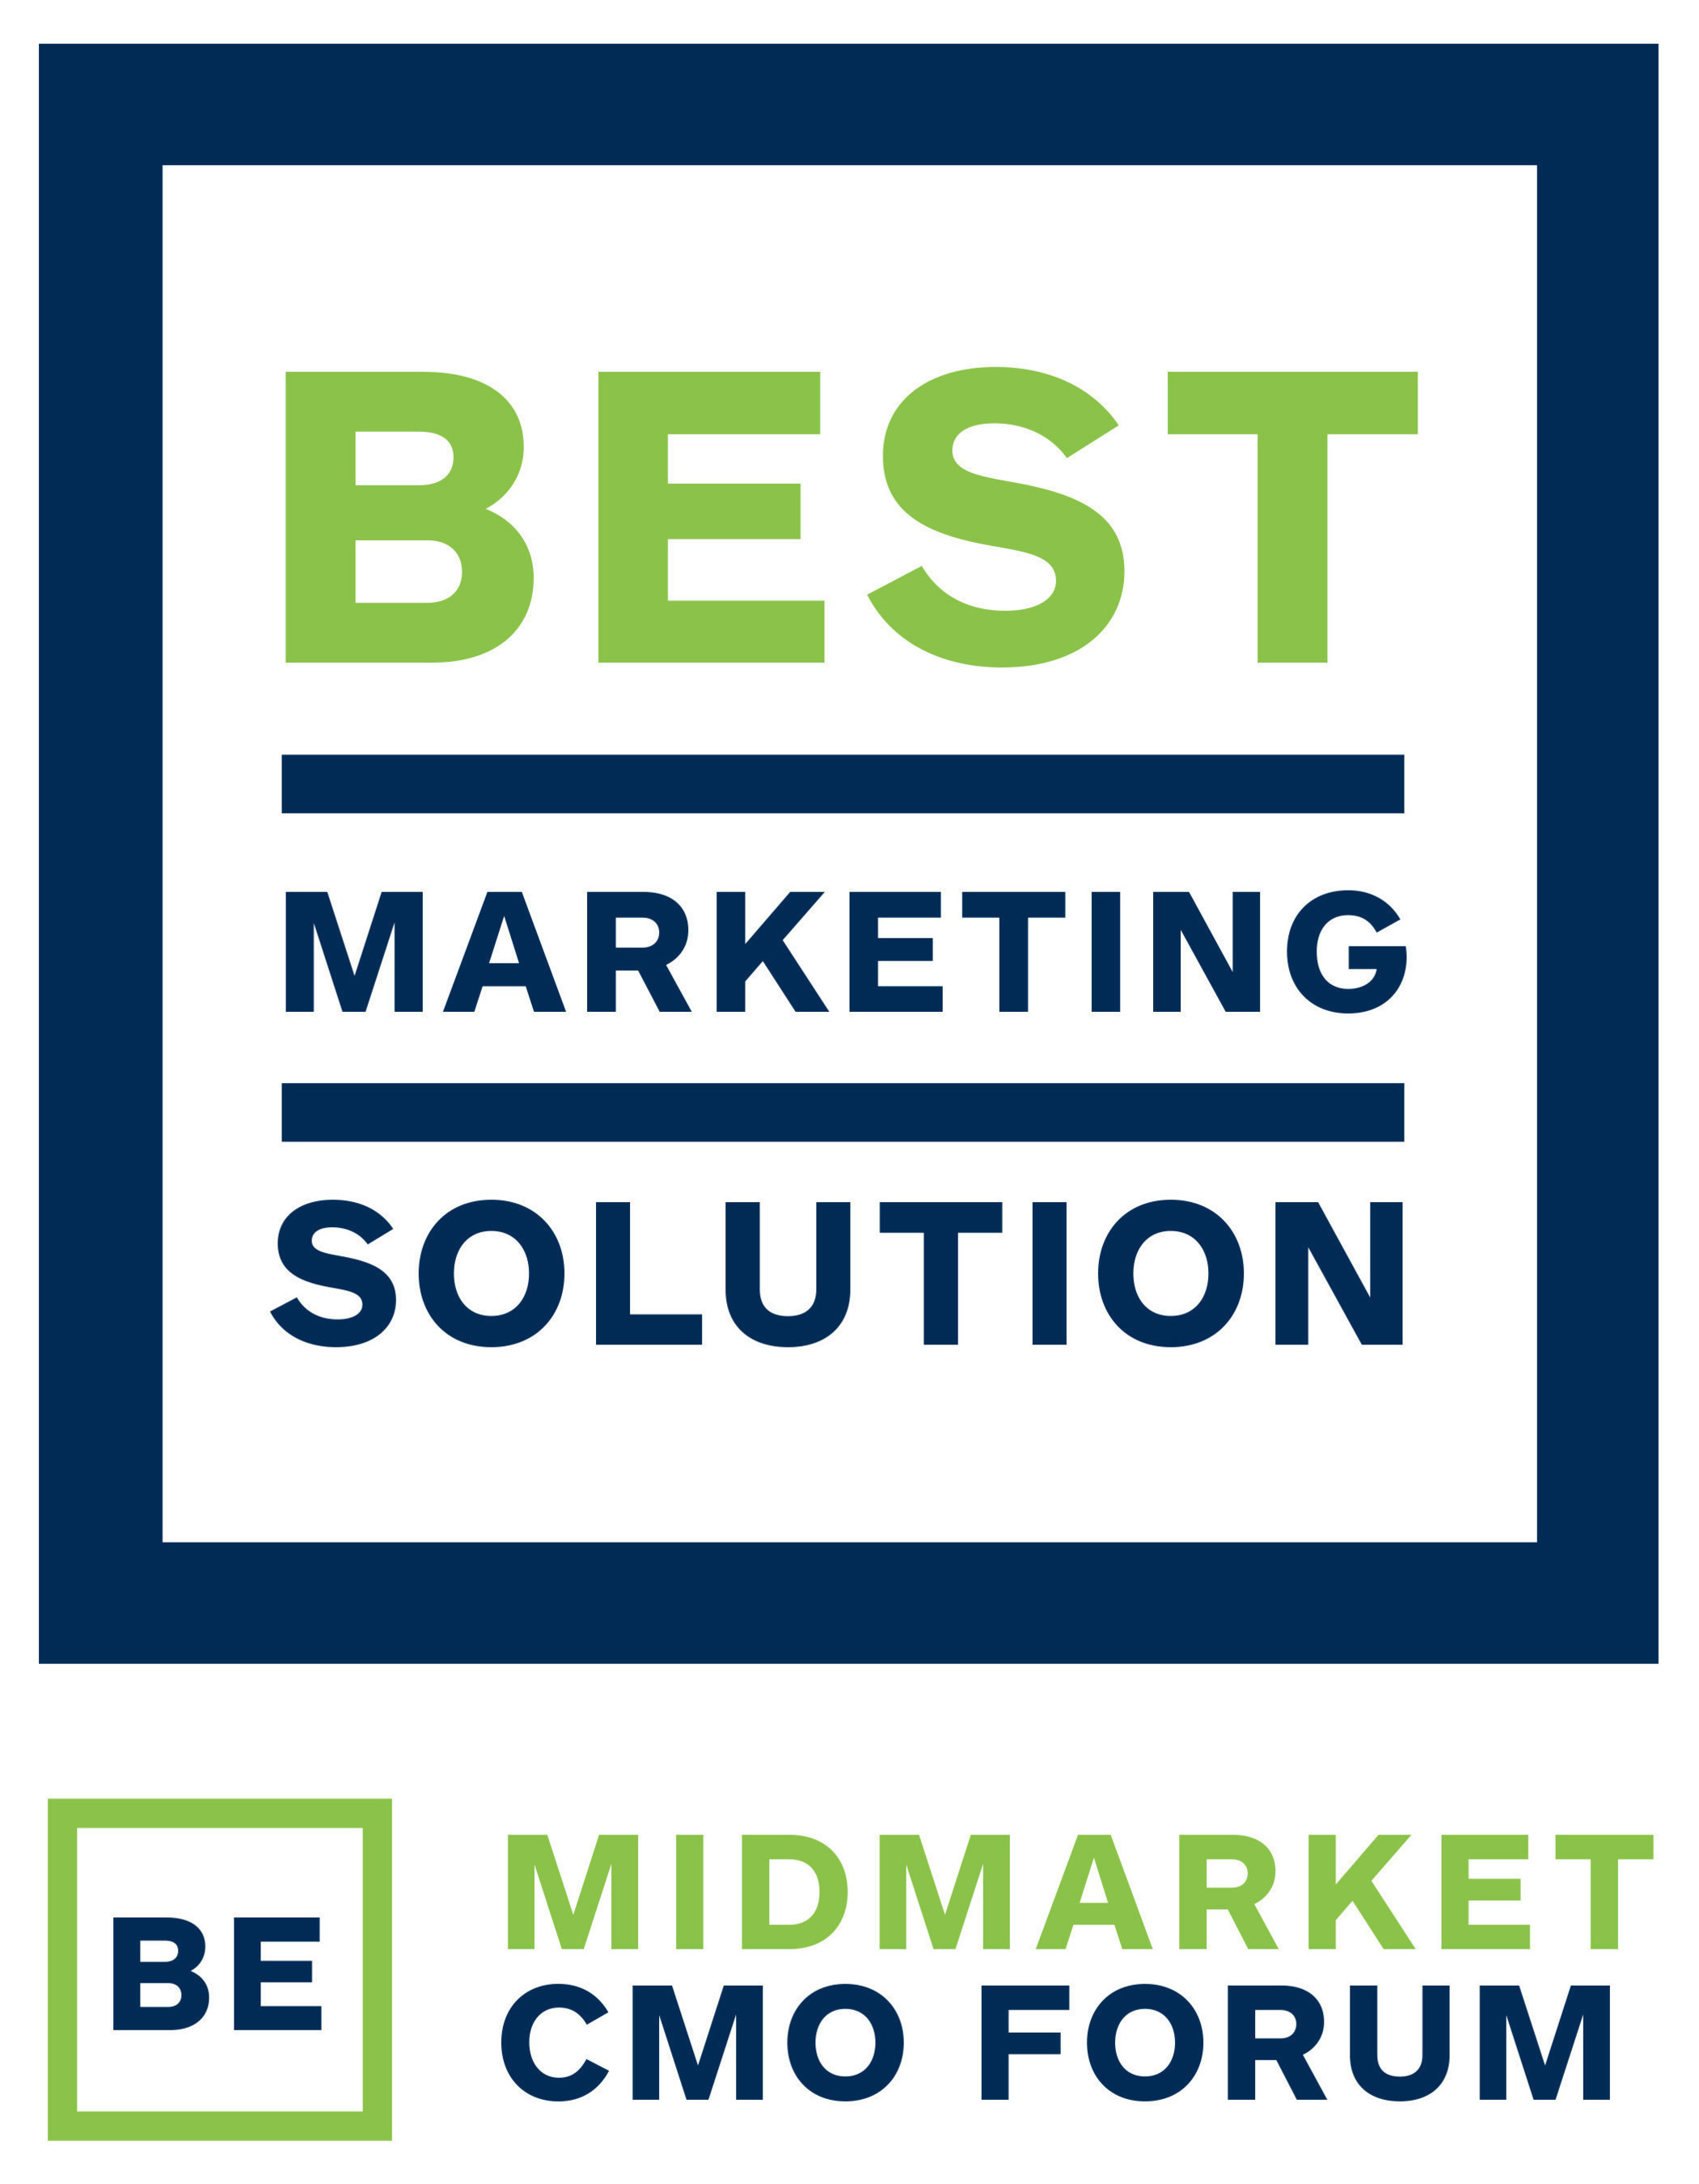 MarcomCentral named "Best Marketing Solution" for its technology, strategy and innovation in marketing technology.